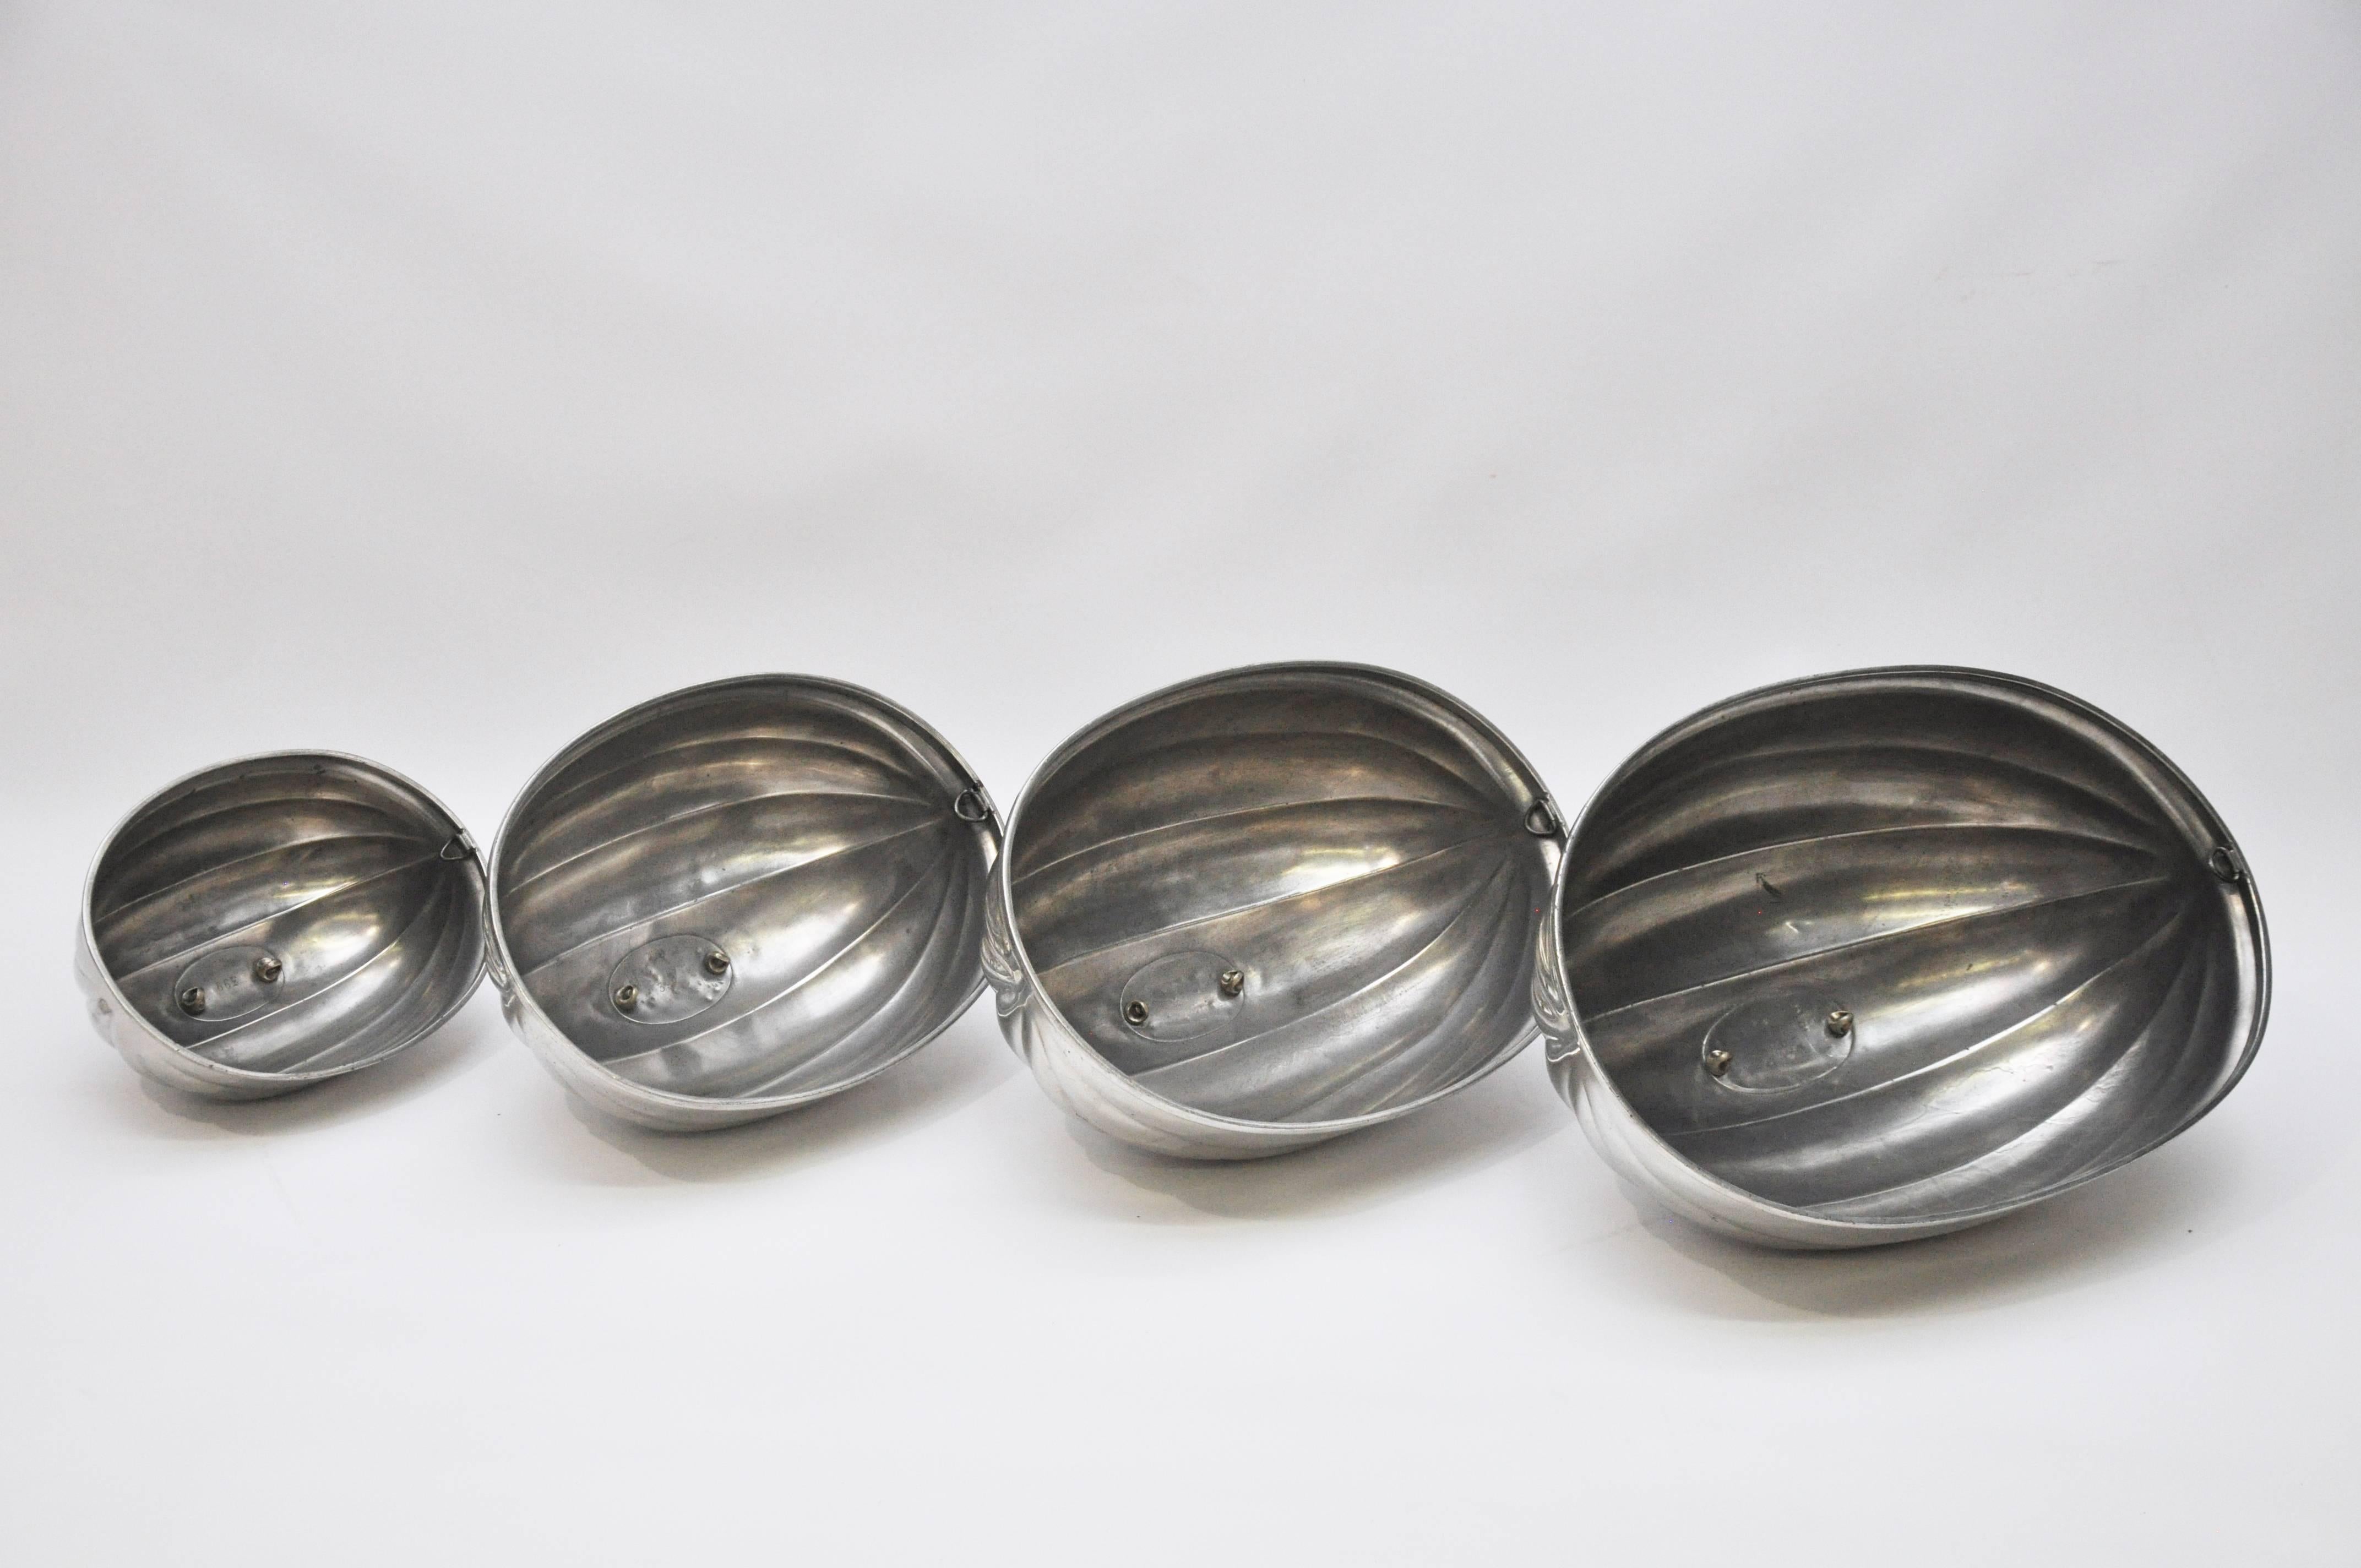 A rare survivor - a complete set of four graduated size meat or food domes, made in the late 19th century by the firm of James Dixon & Sons, Sheffield. Of polished pewter in a melon-ribbed form. Detachable handles are cast in the shape of twisted